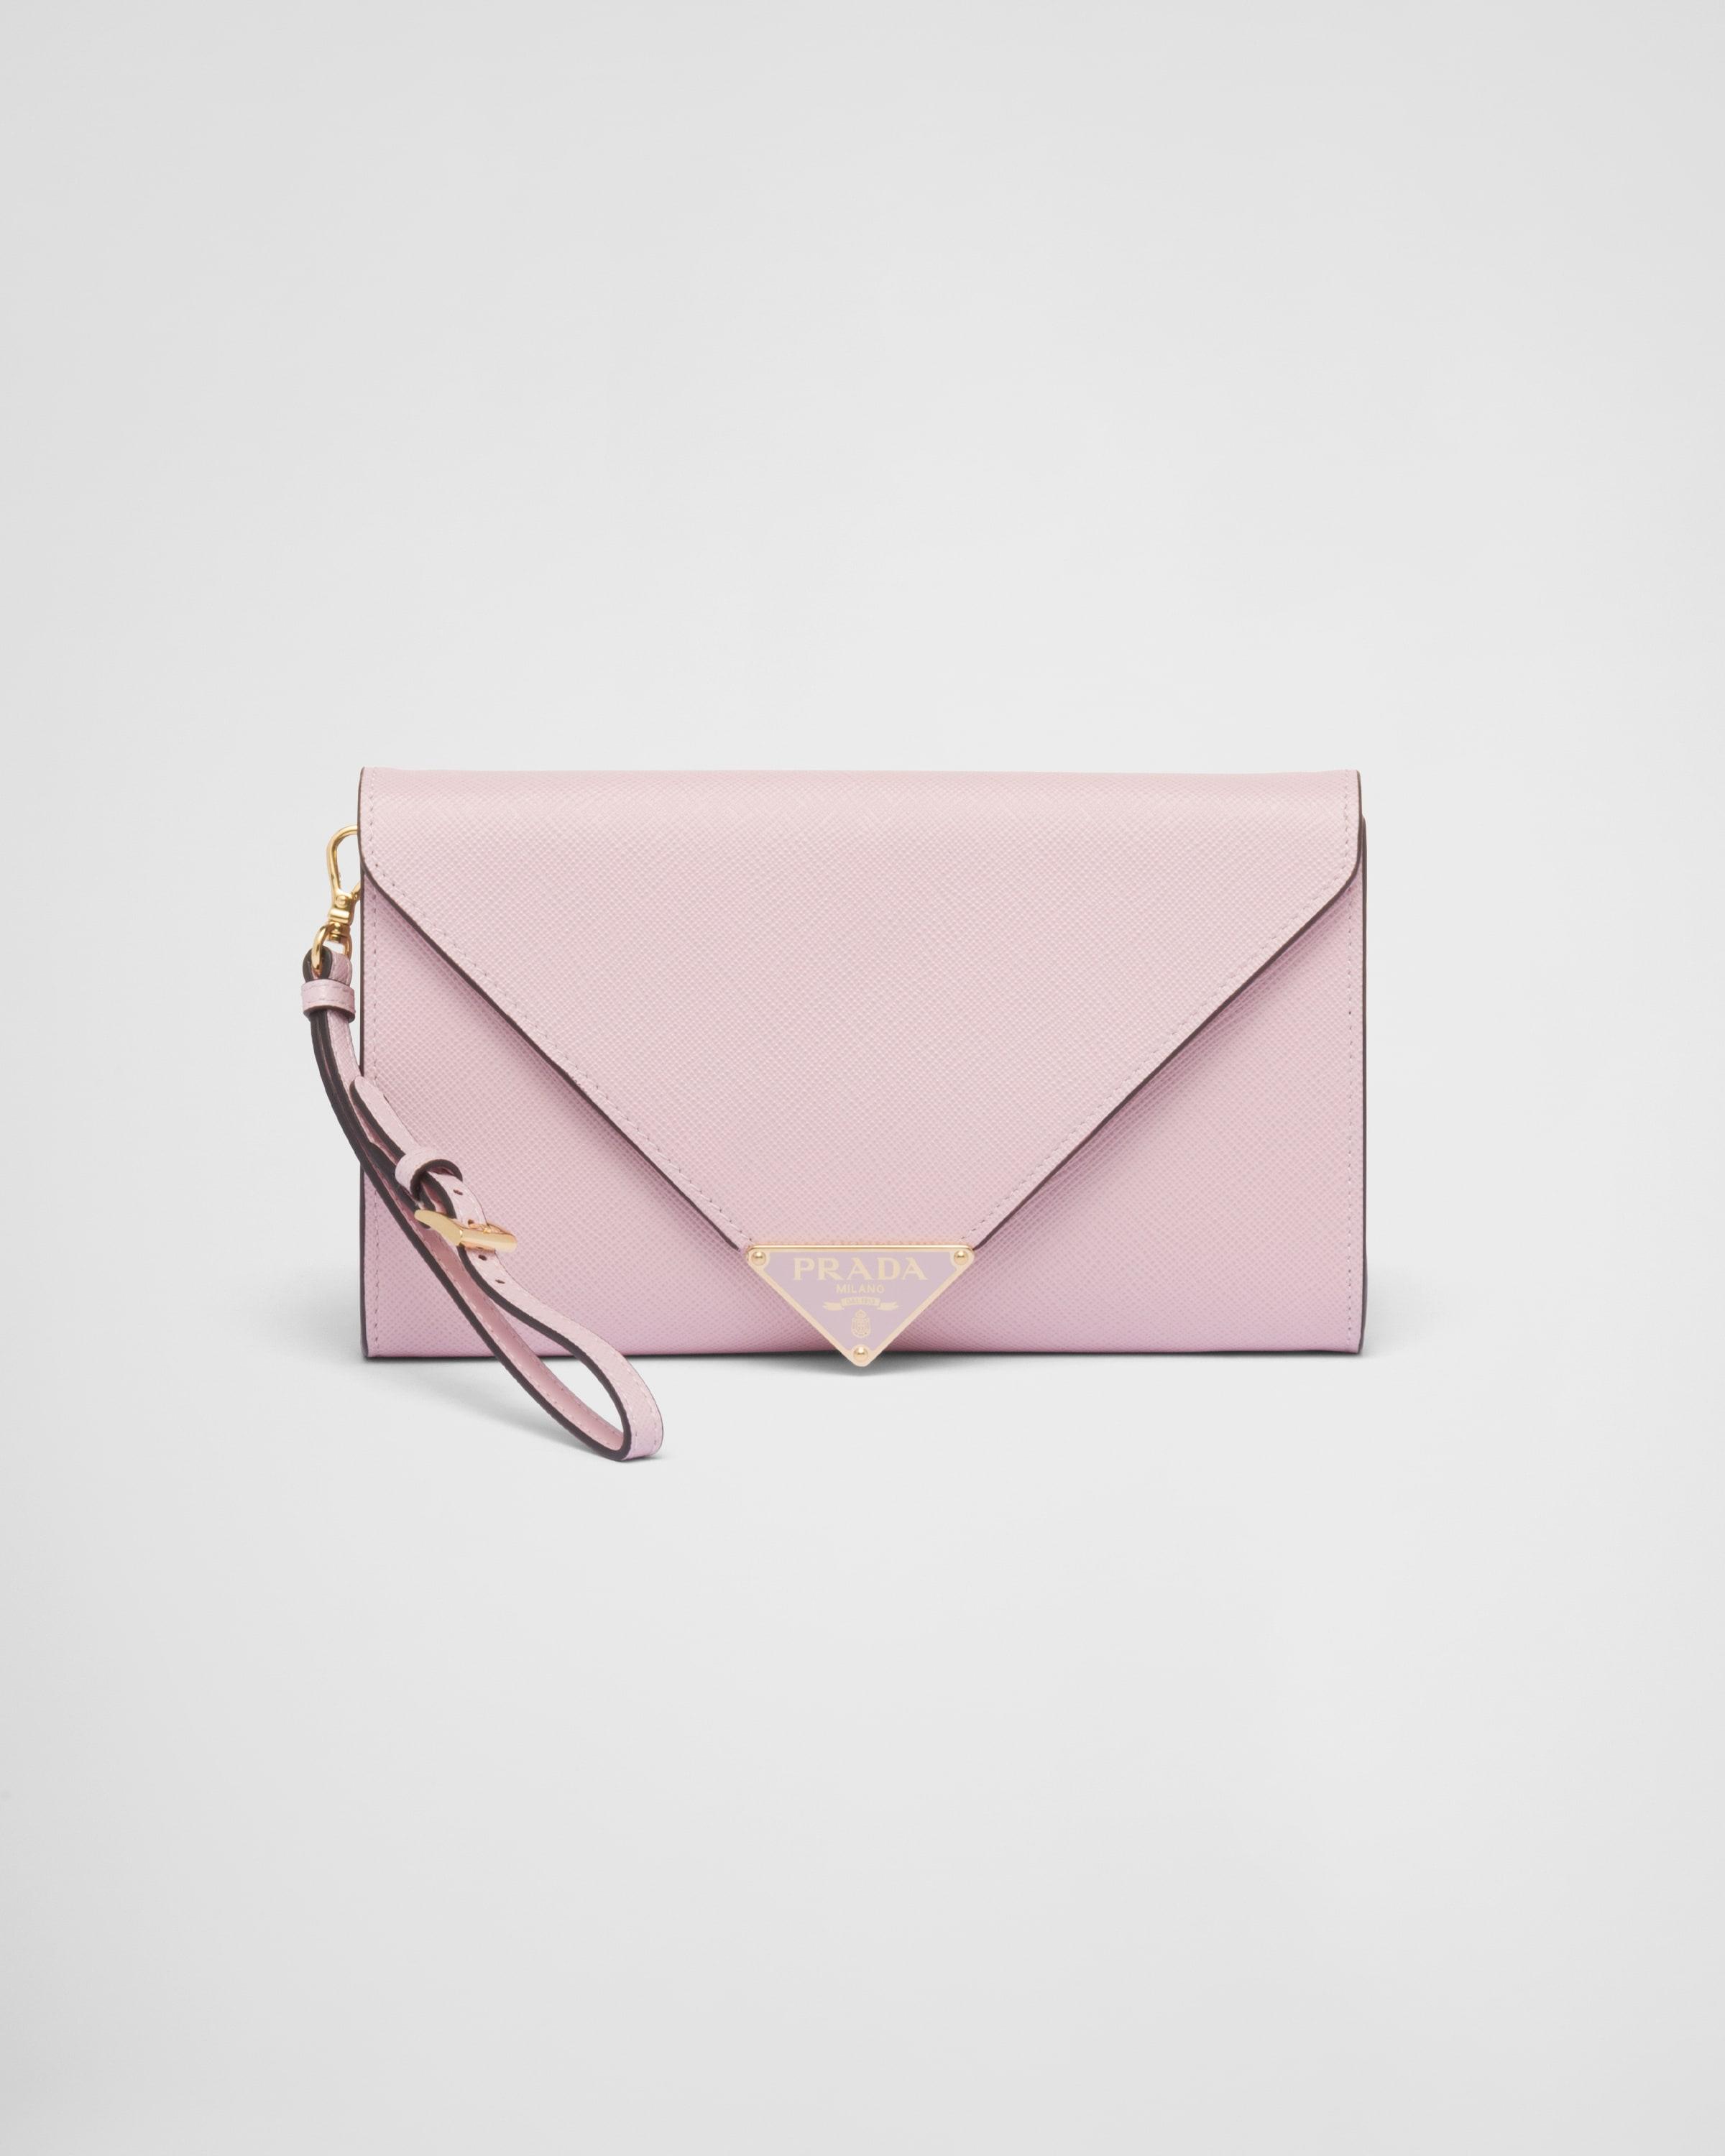 Prada Small Saffiano and Leather Wallet, Women, Alabaster Pink